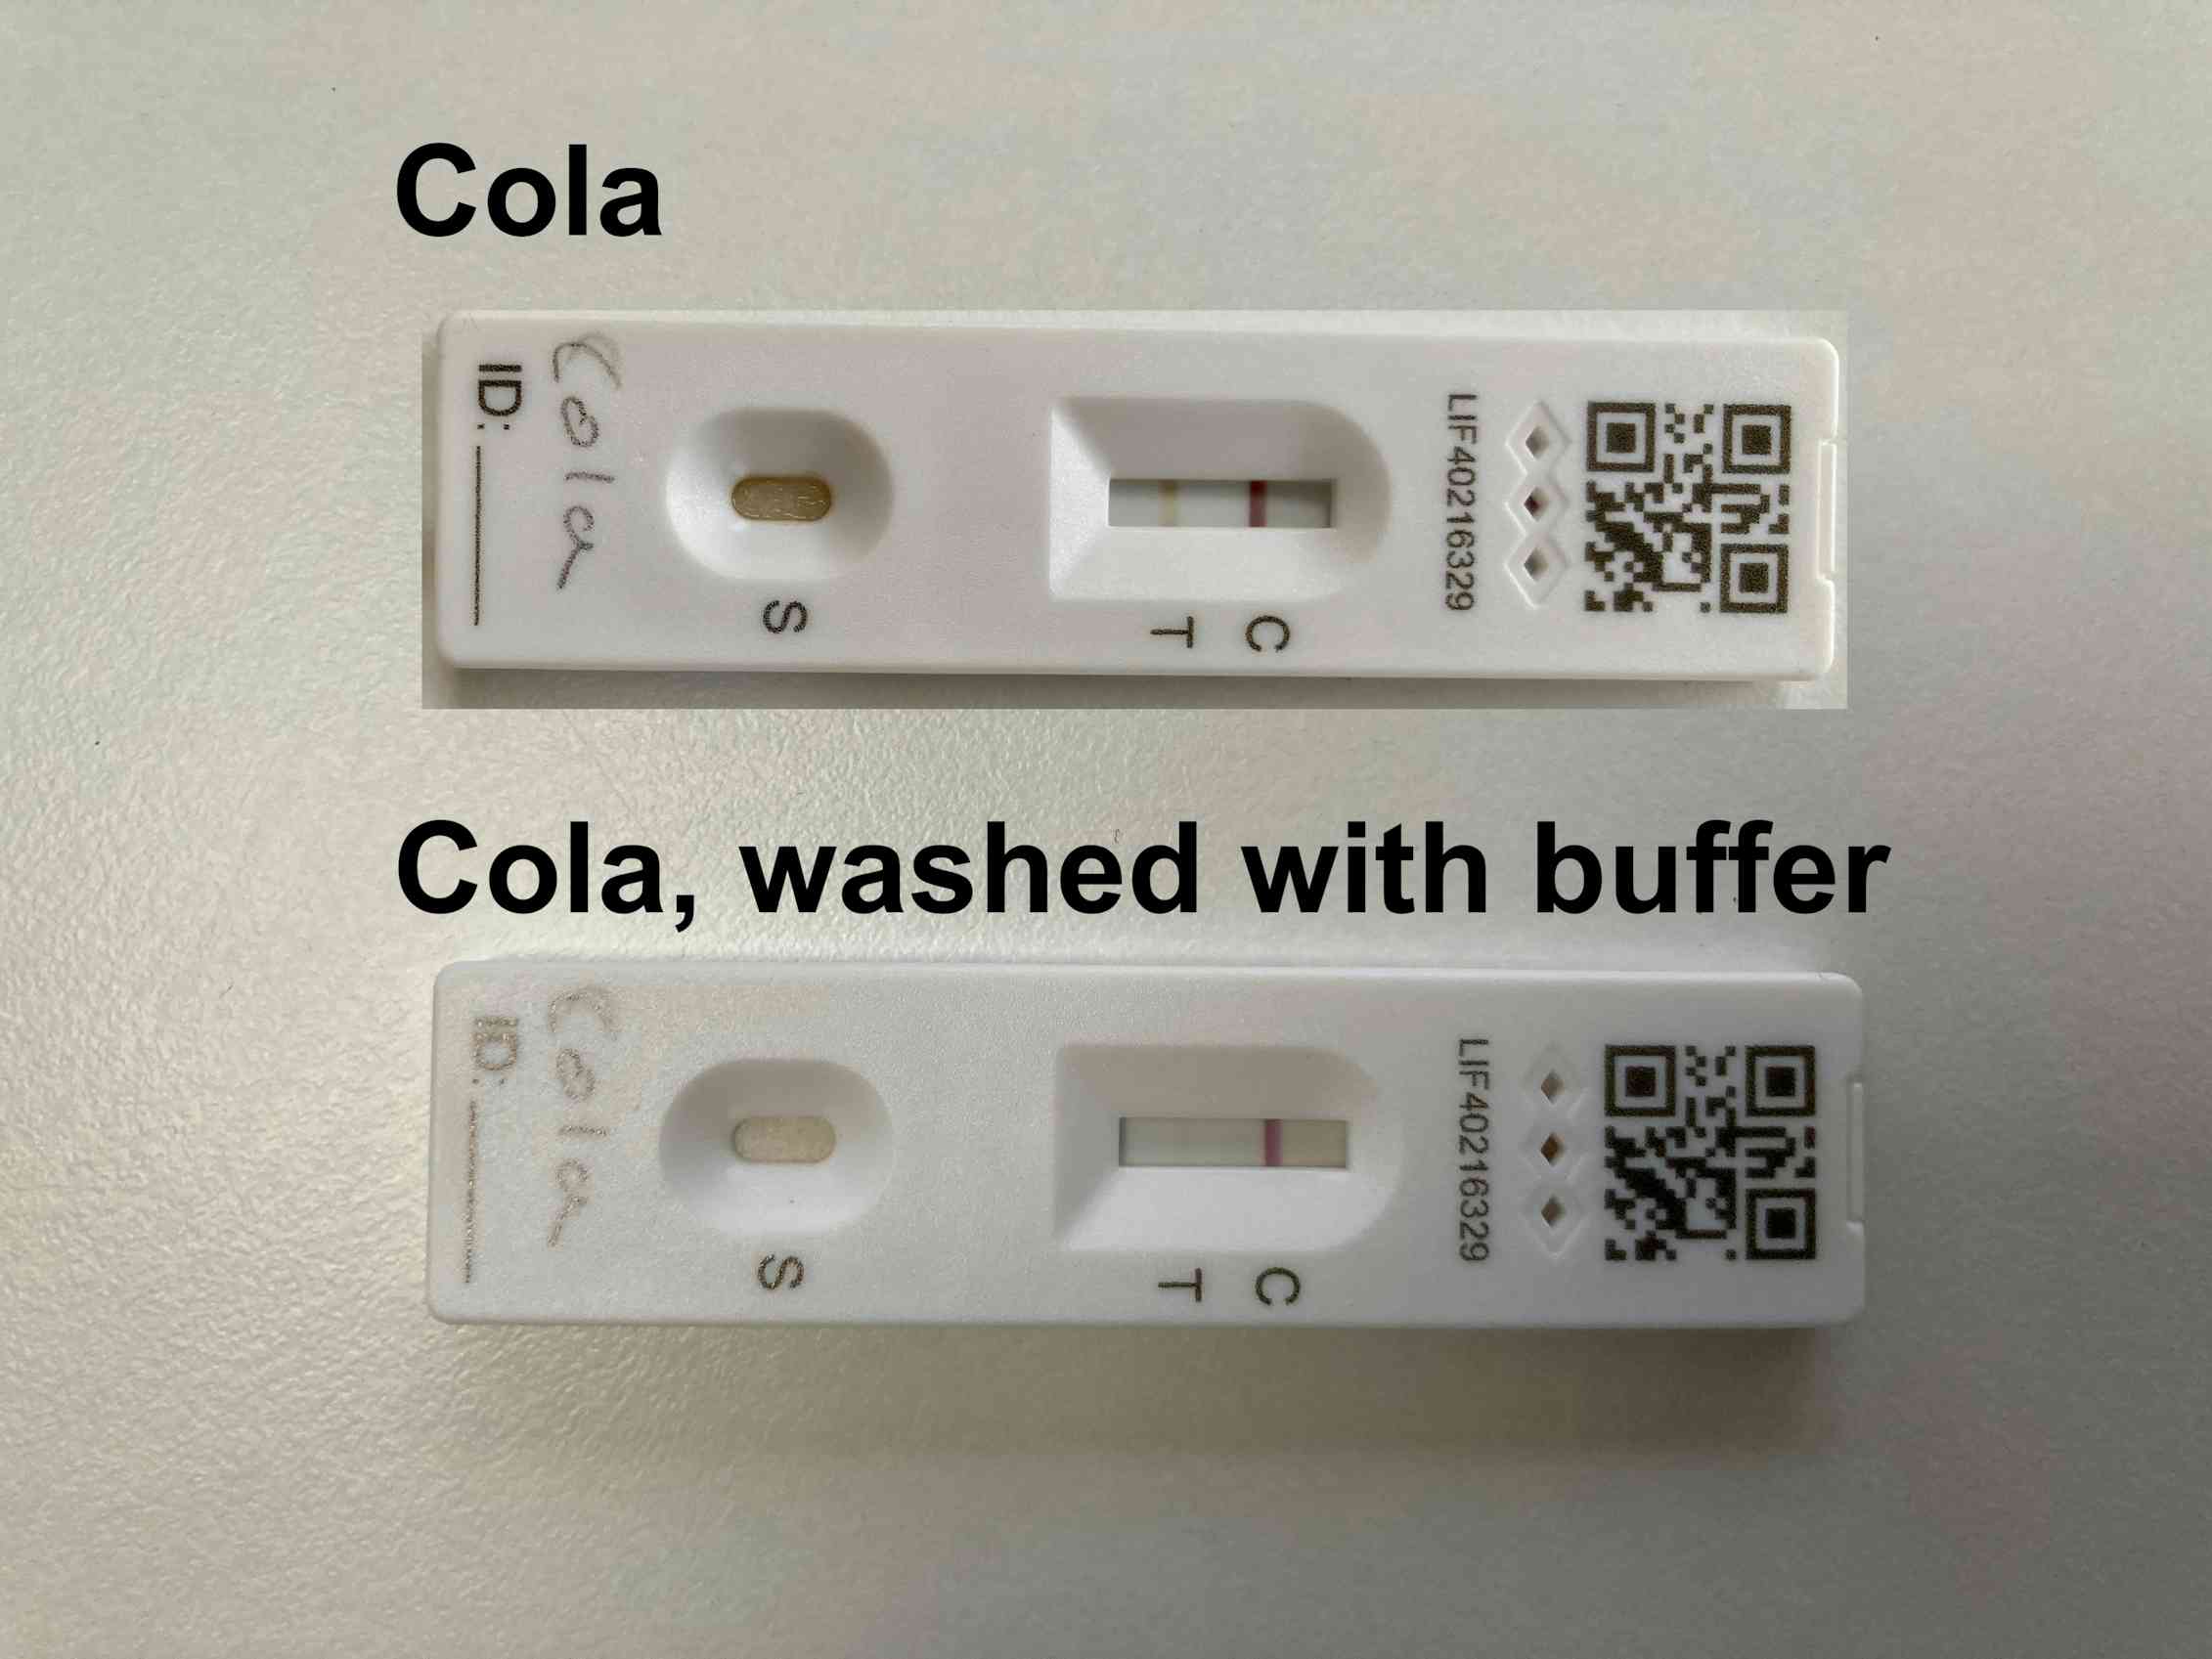 COVID19 kids are using soft drinks to fake positive tests I've